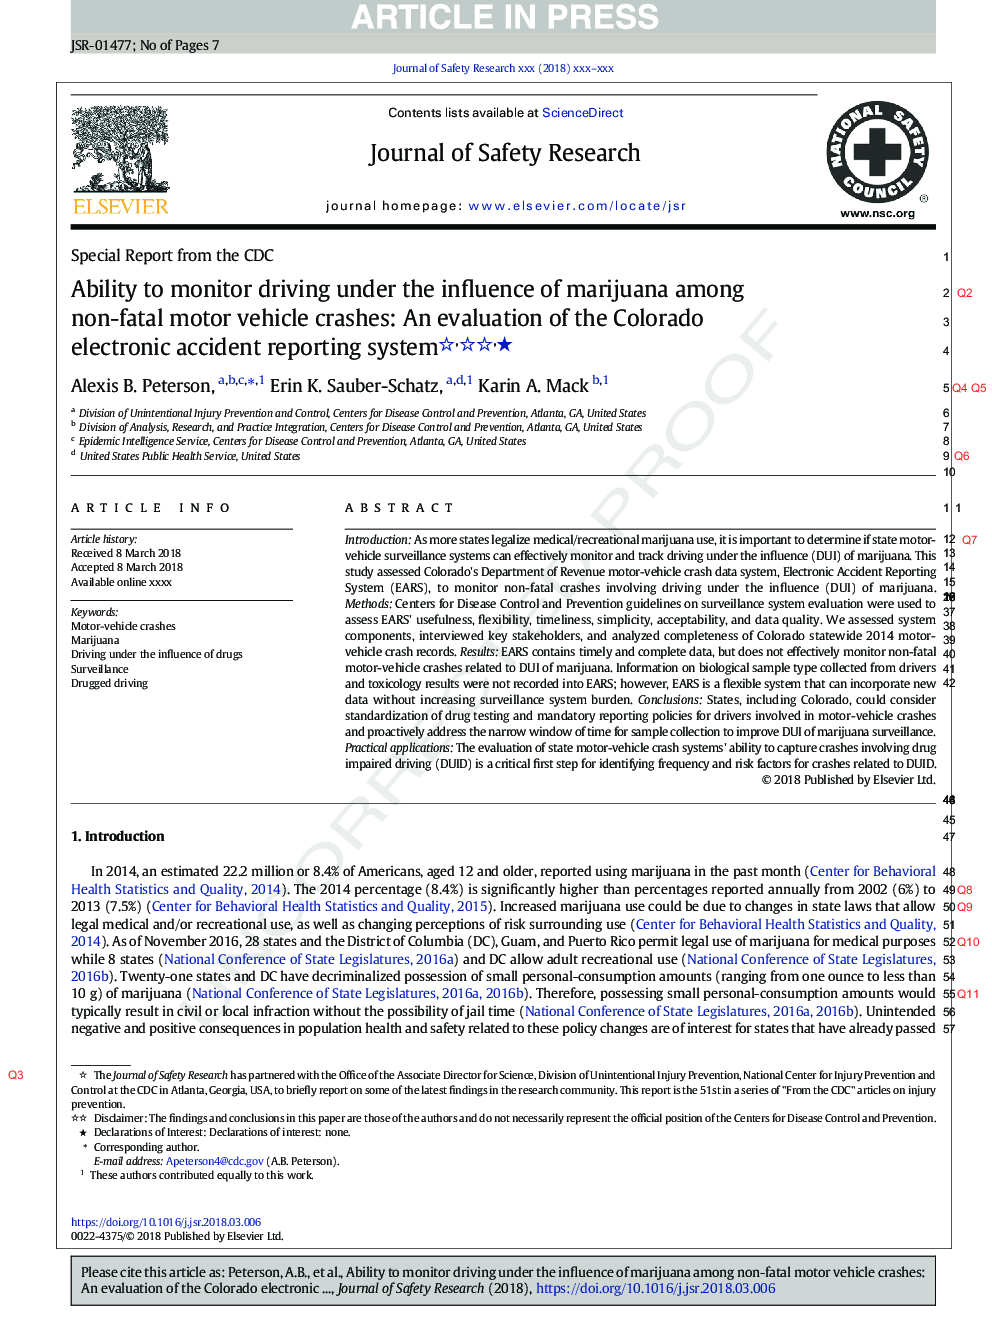 Ability to monitor driving under the influence of marijuana among non-fatal motor-vehicle crashes: An evaluation of the Colorado electronic accident reporting system